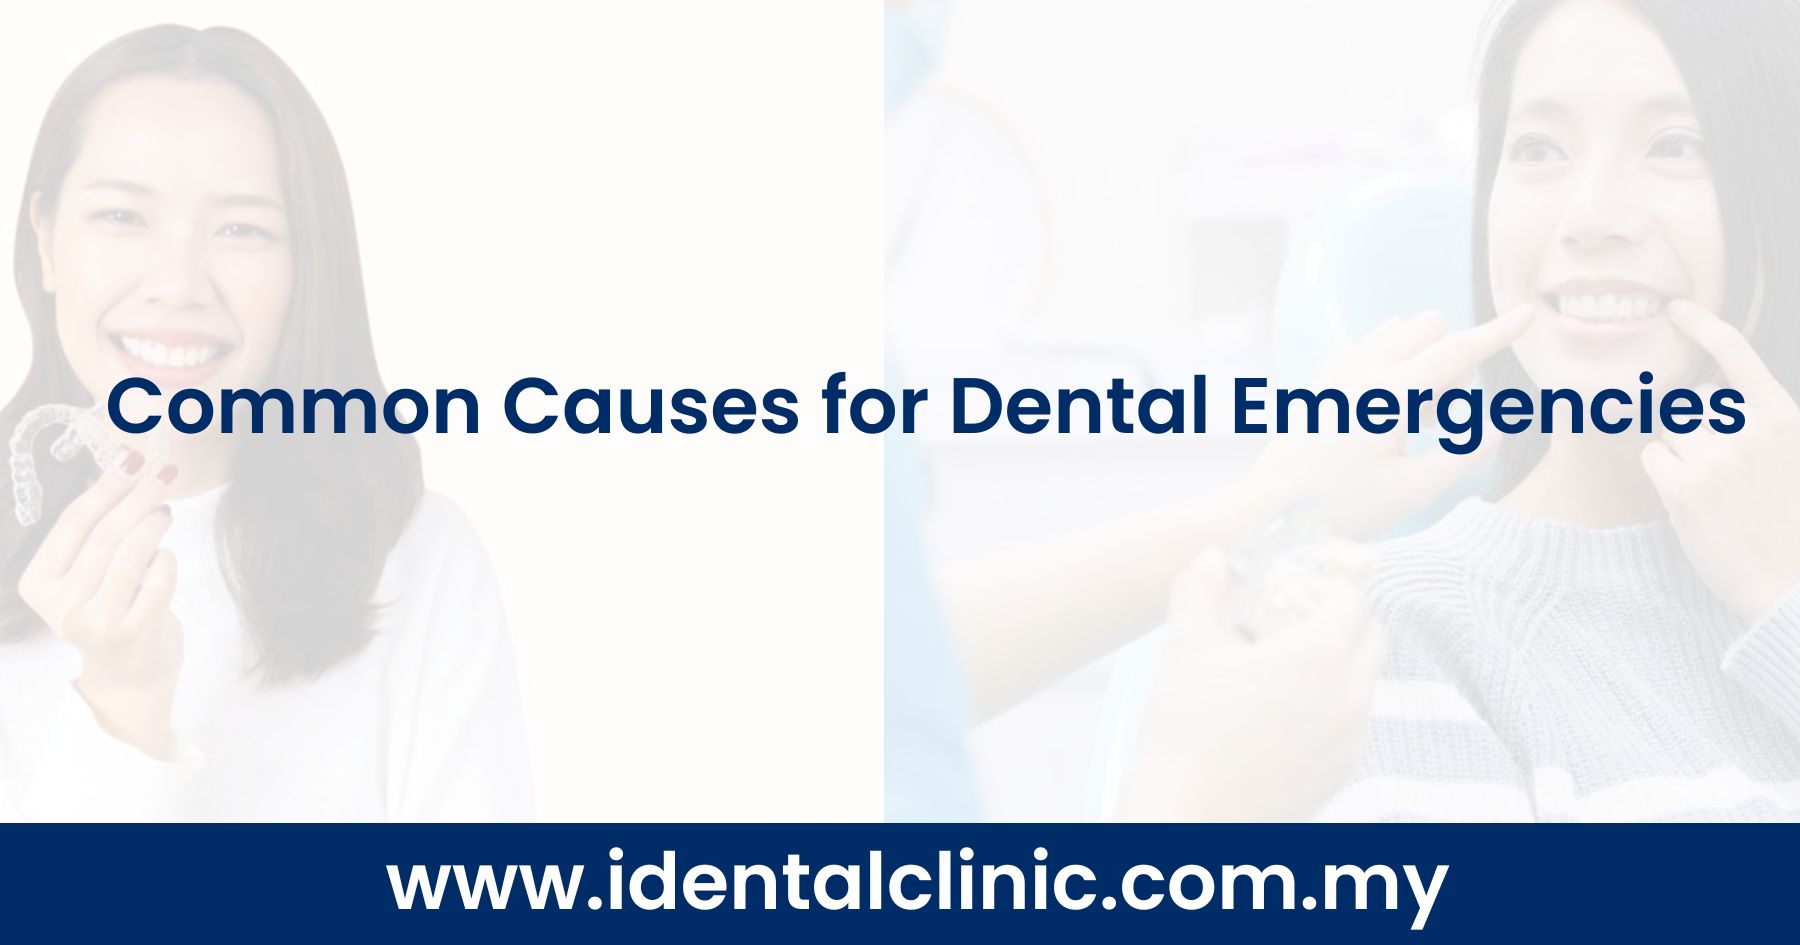 Common Causes for Dental Emergencies